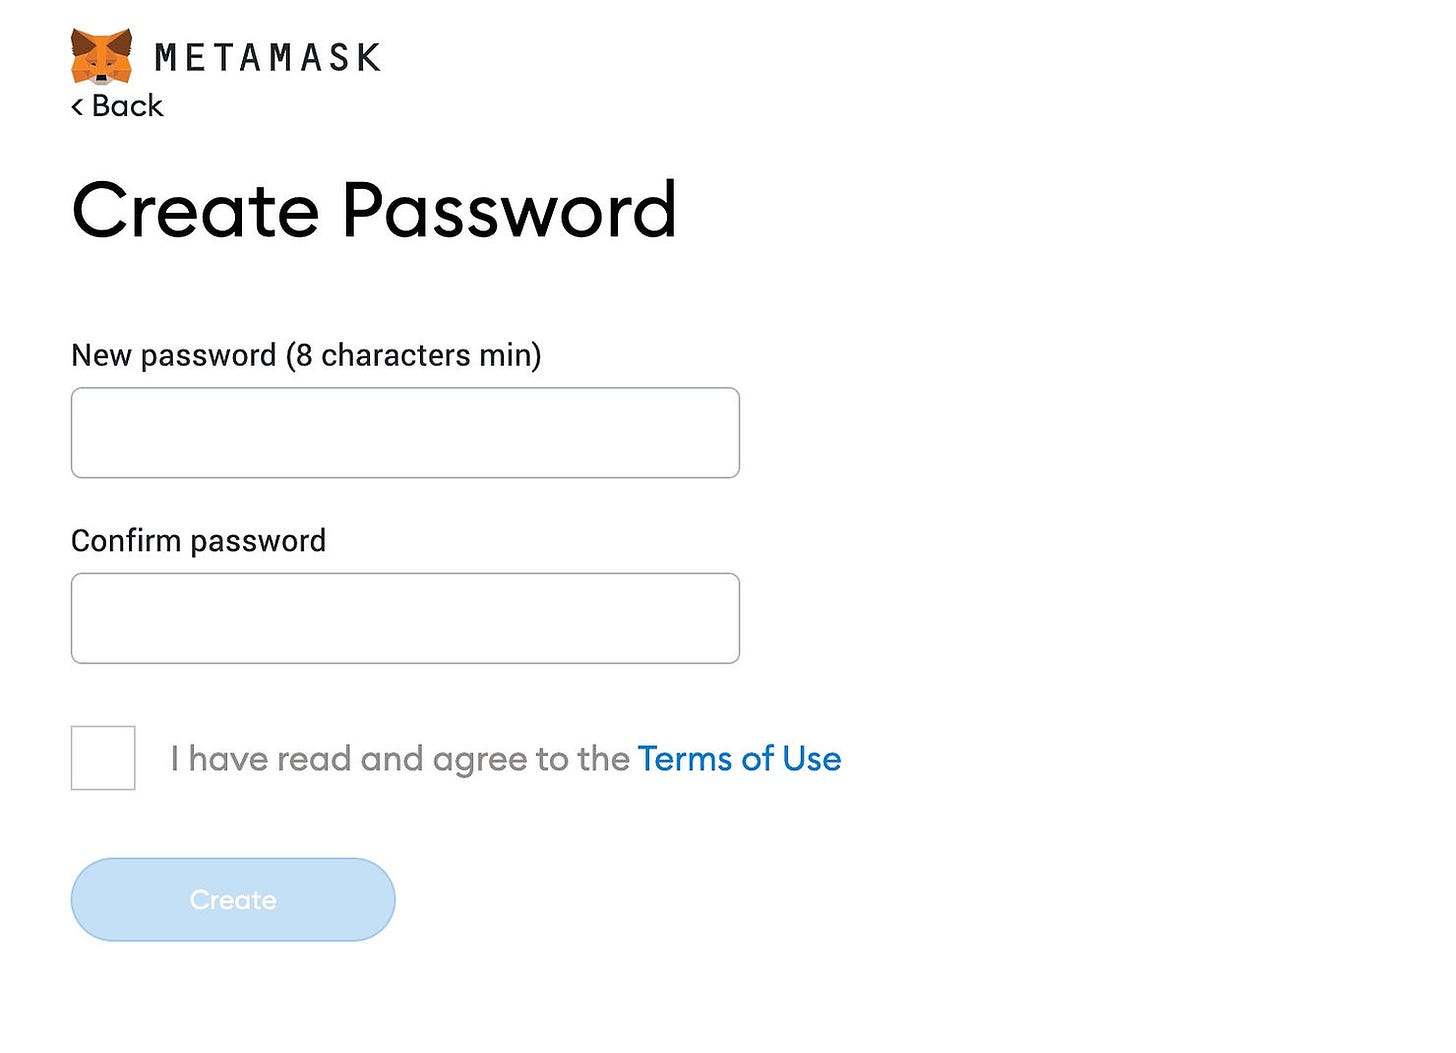 This password is specific to my laptop device.